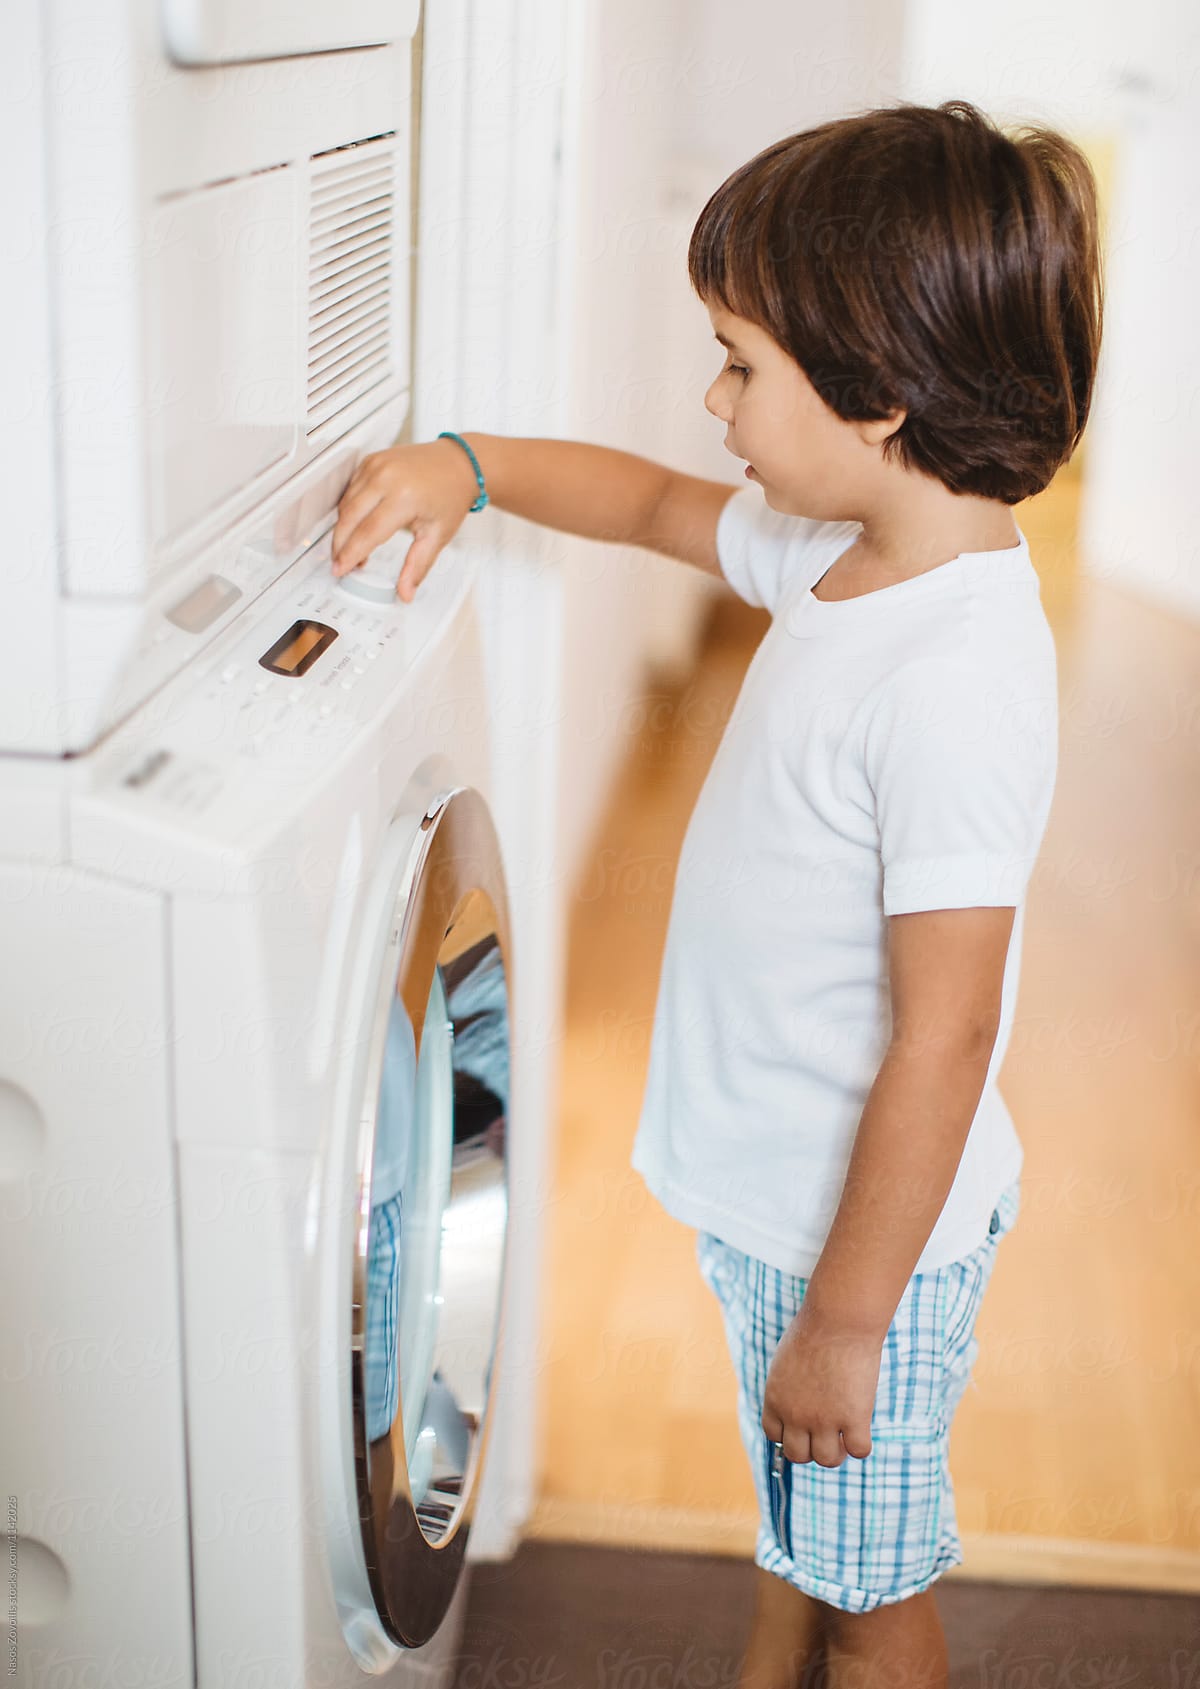 5 year old boy in front of a washing machine